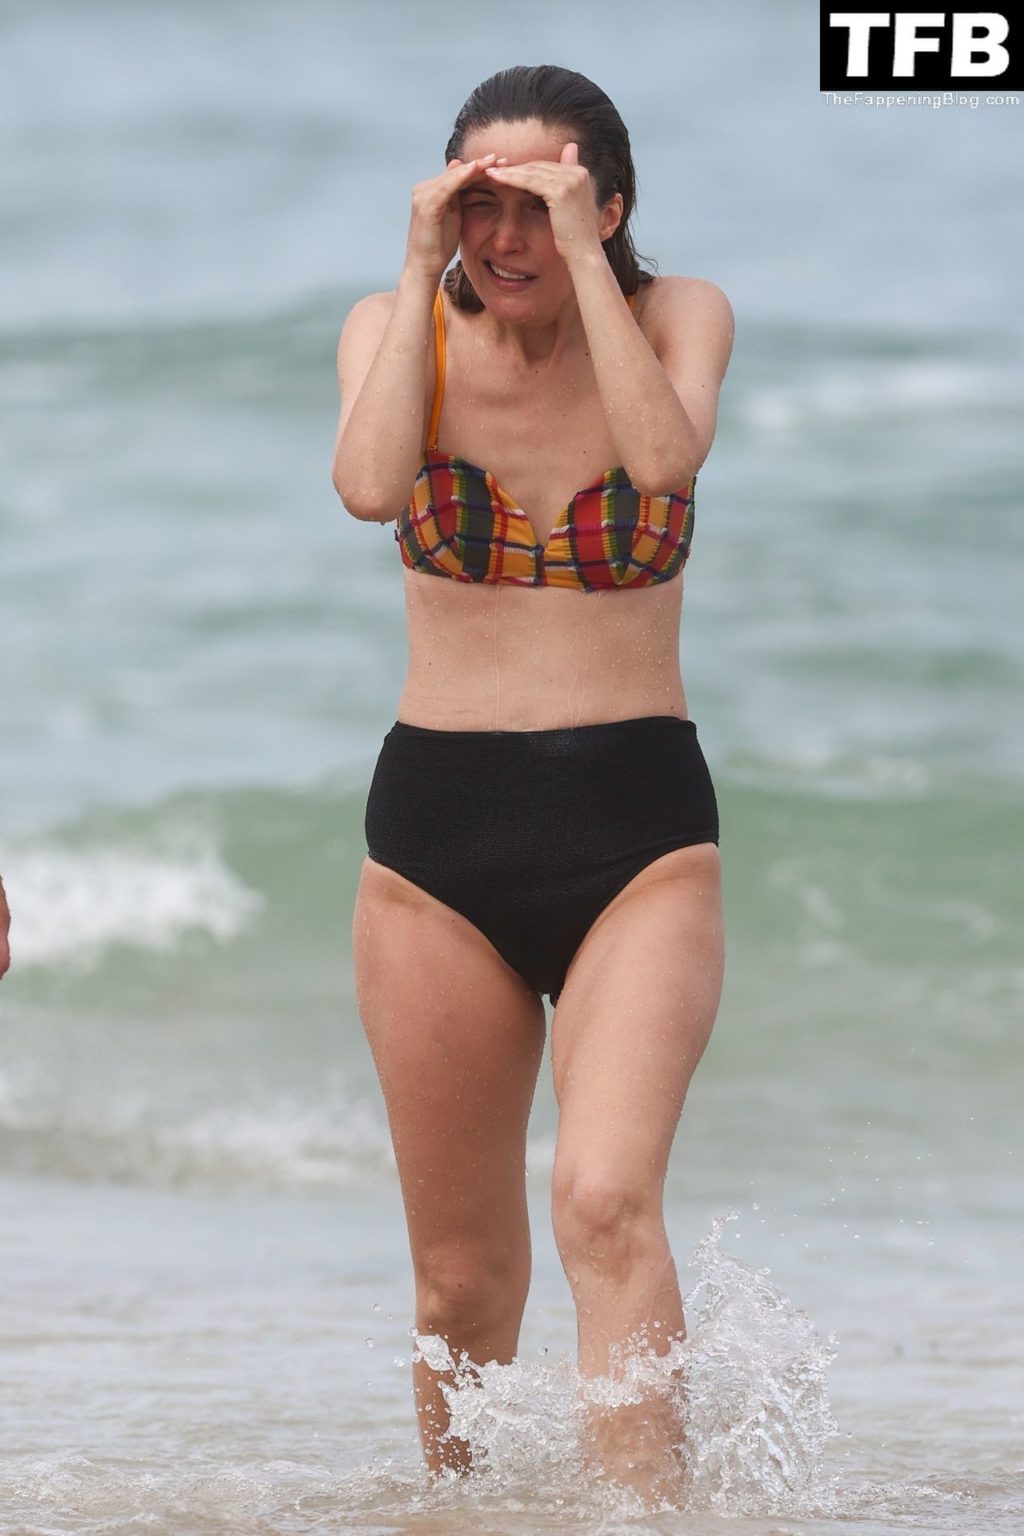 Rose Byrne Sexy The Fappening Blog 66 1024x1536 - Rose Byrne & Kick Gurry Enjoy a Day on the Beach in Sydney (90 Photos)